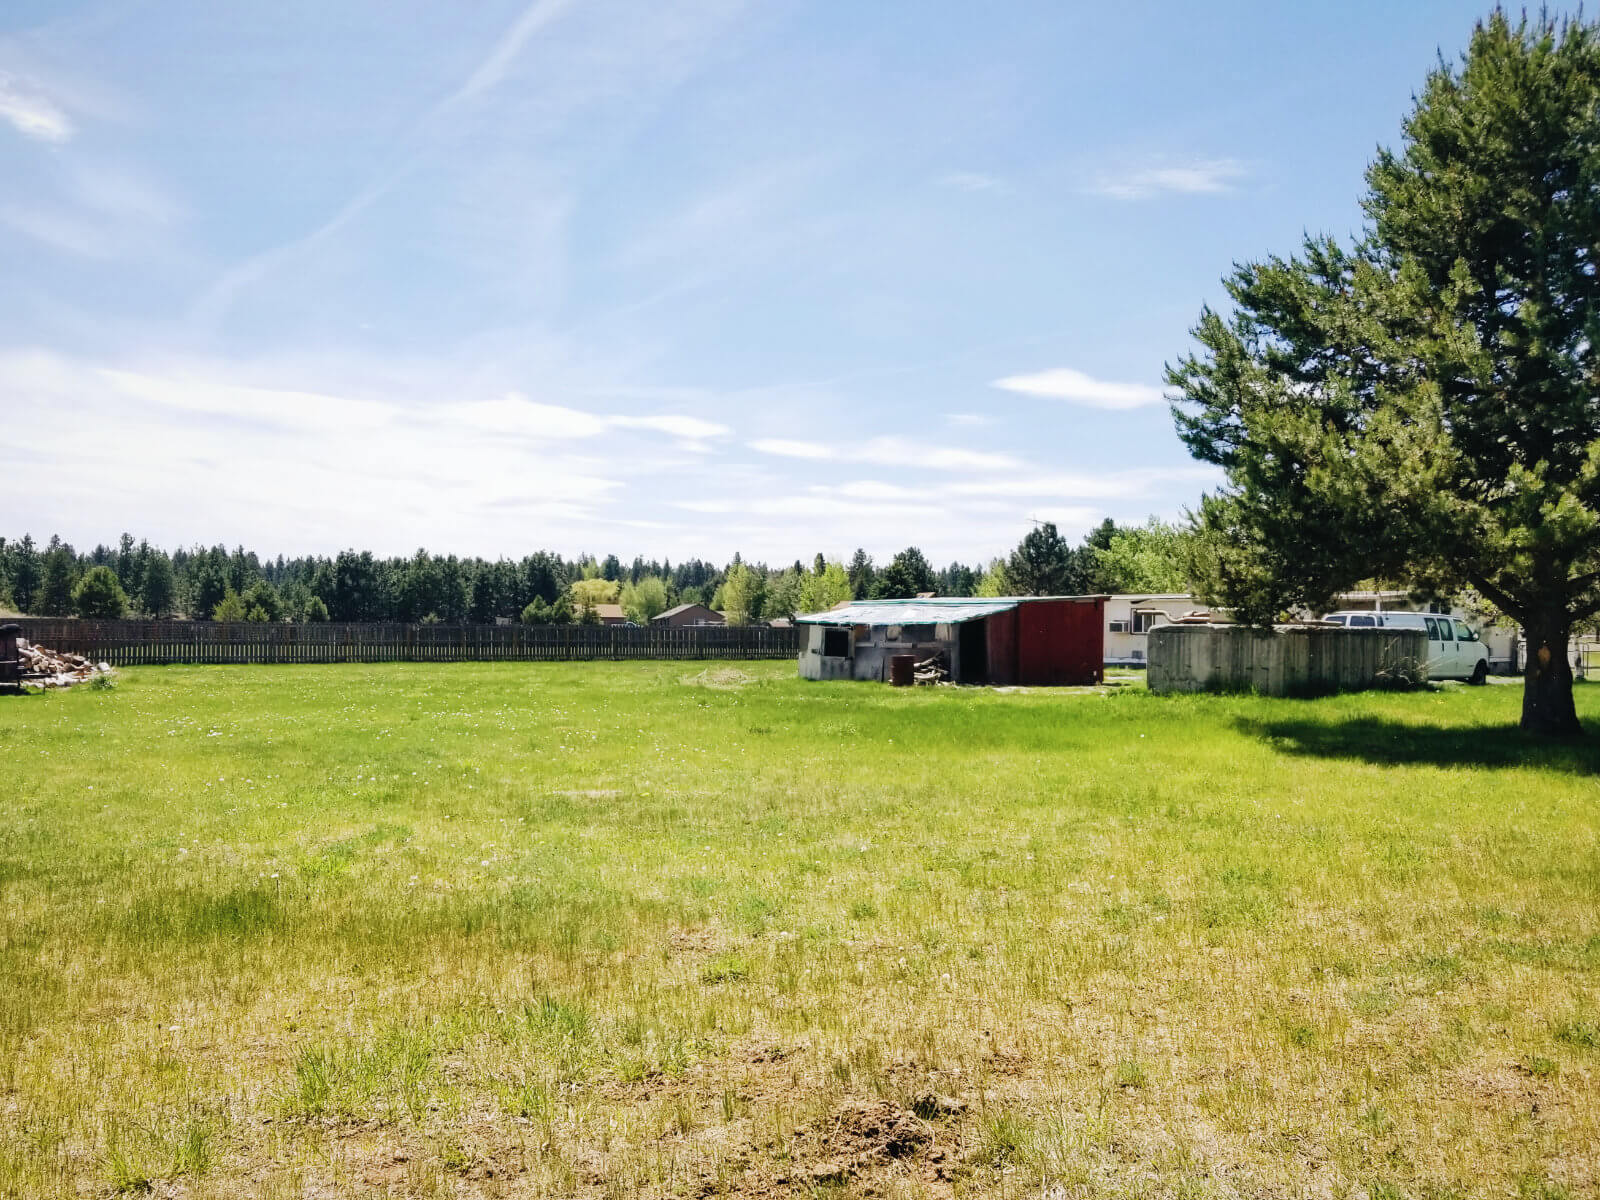 Buying a tear-down in Bend, Oregon, to build on